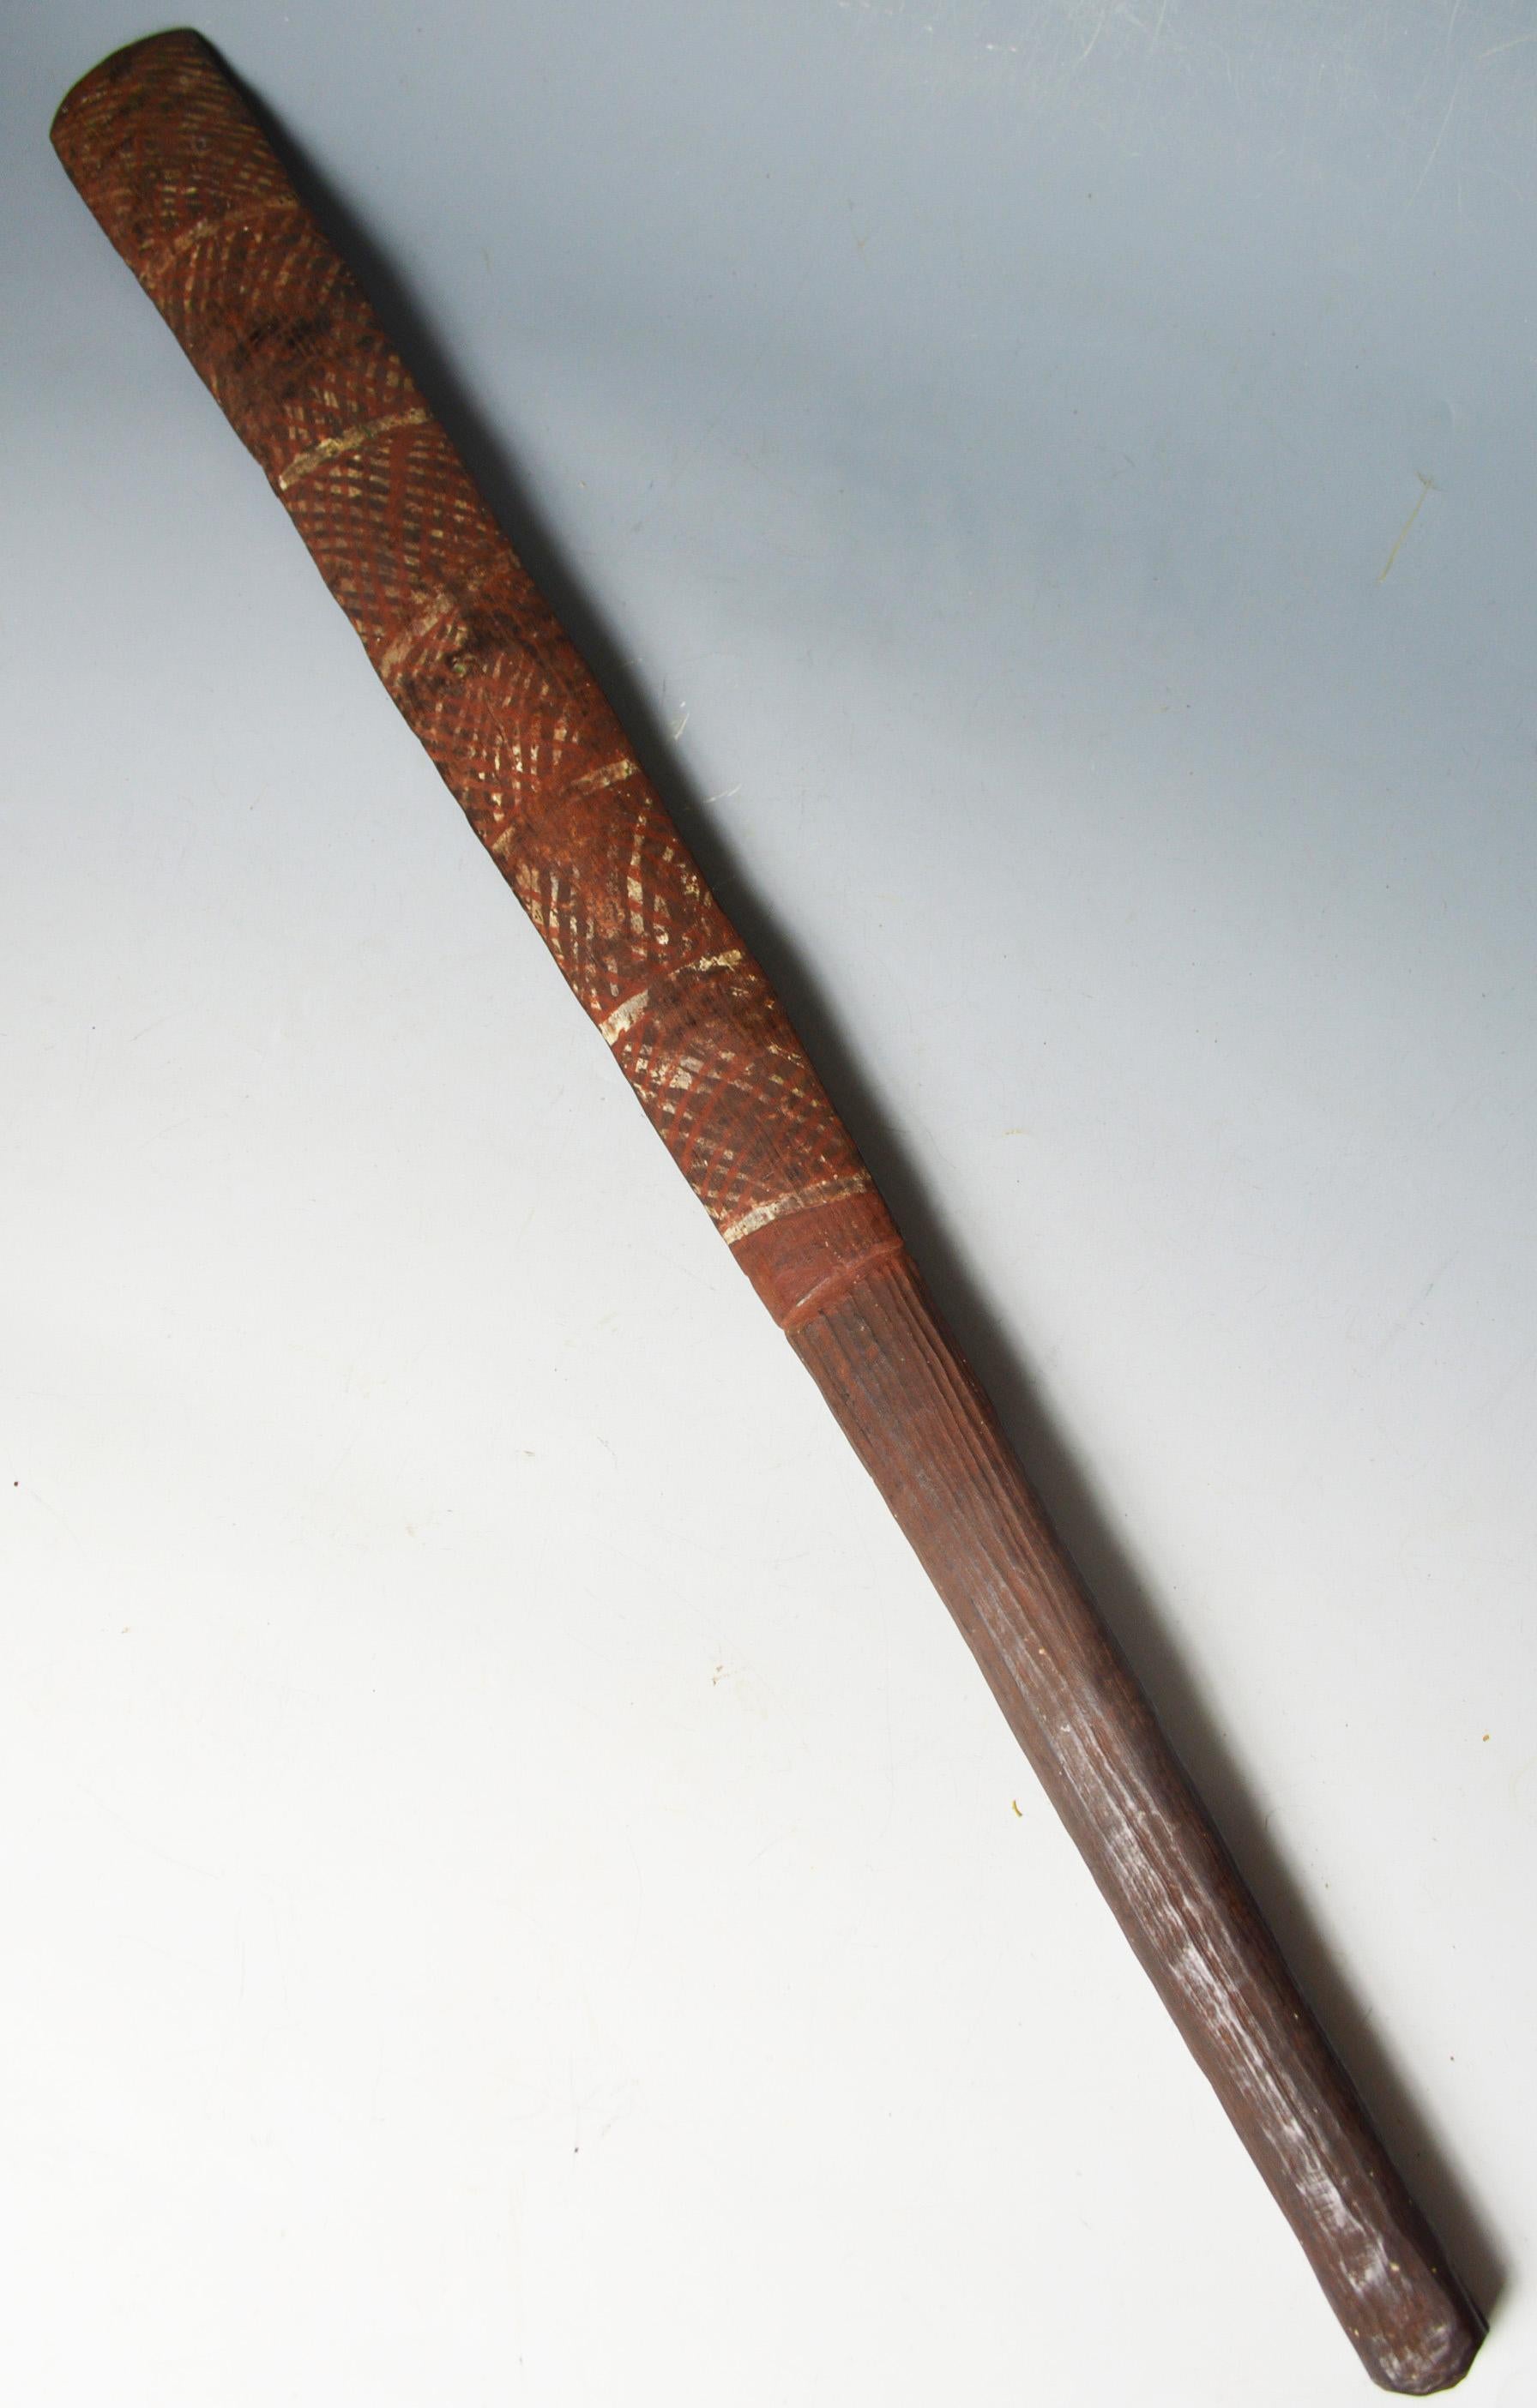 Fine rare old Aboriginal Tiwi Islands ceremonial paddle club
The very finely carved club in hard dark wood with fluted shaft and slender elongated blade resembling a paddle,
painted with circular designs and linear patterns on the front and back,